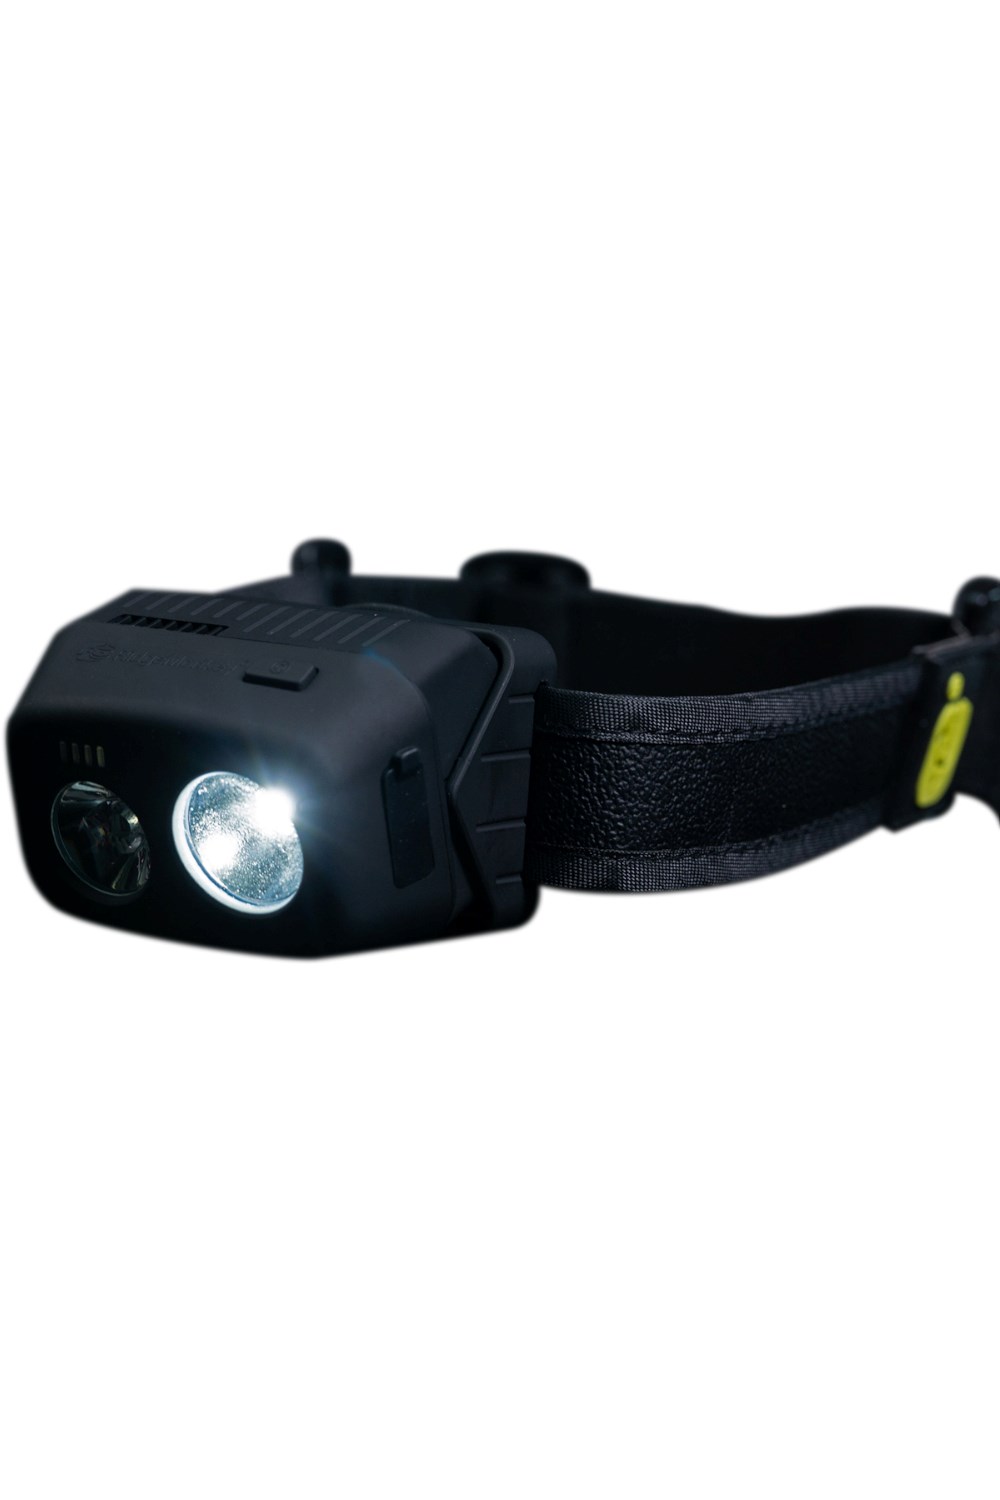 Vrh300x Usb Rechargeable Headtorch -